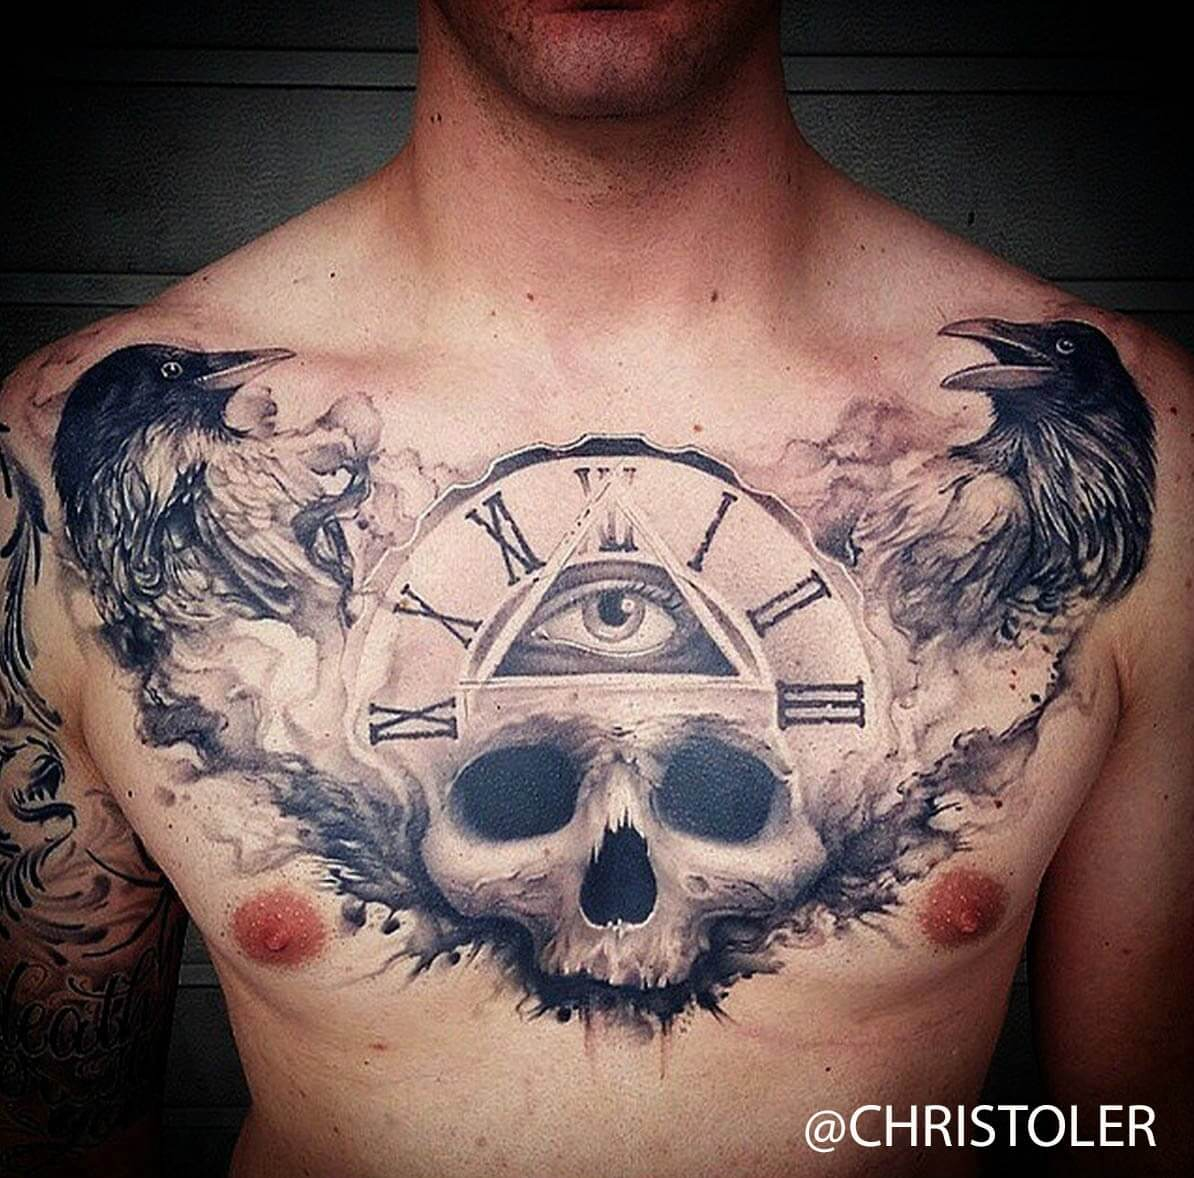 The 100 Best Chest Tattoos For Men Improb intended for dimensions 1194 X 1178